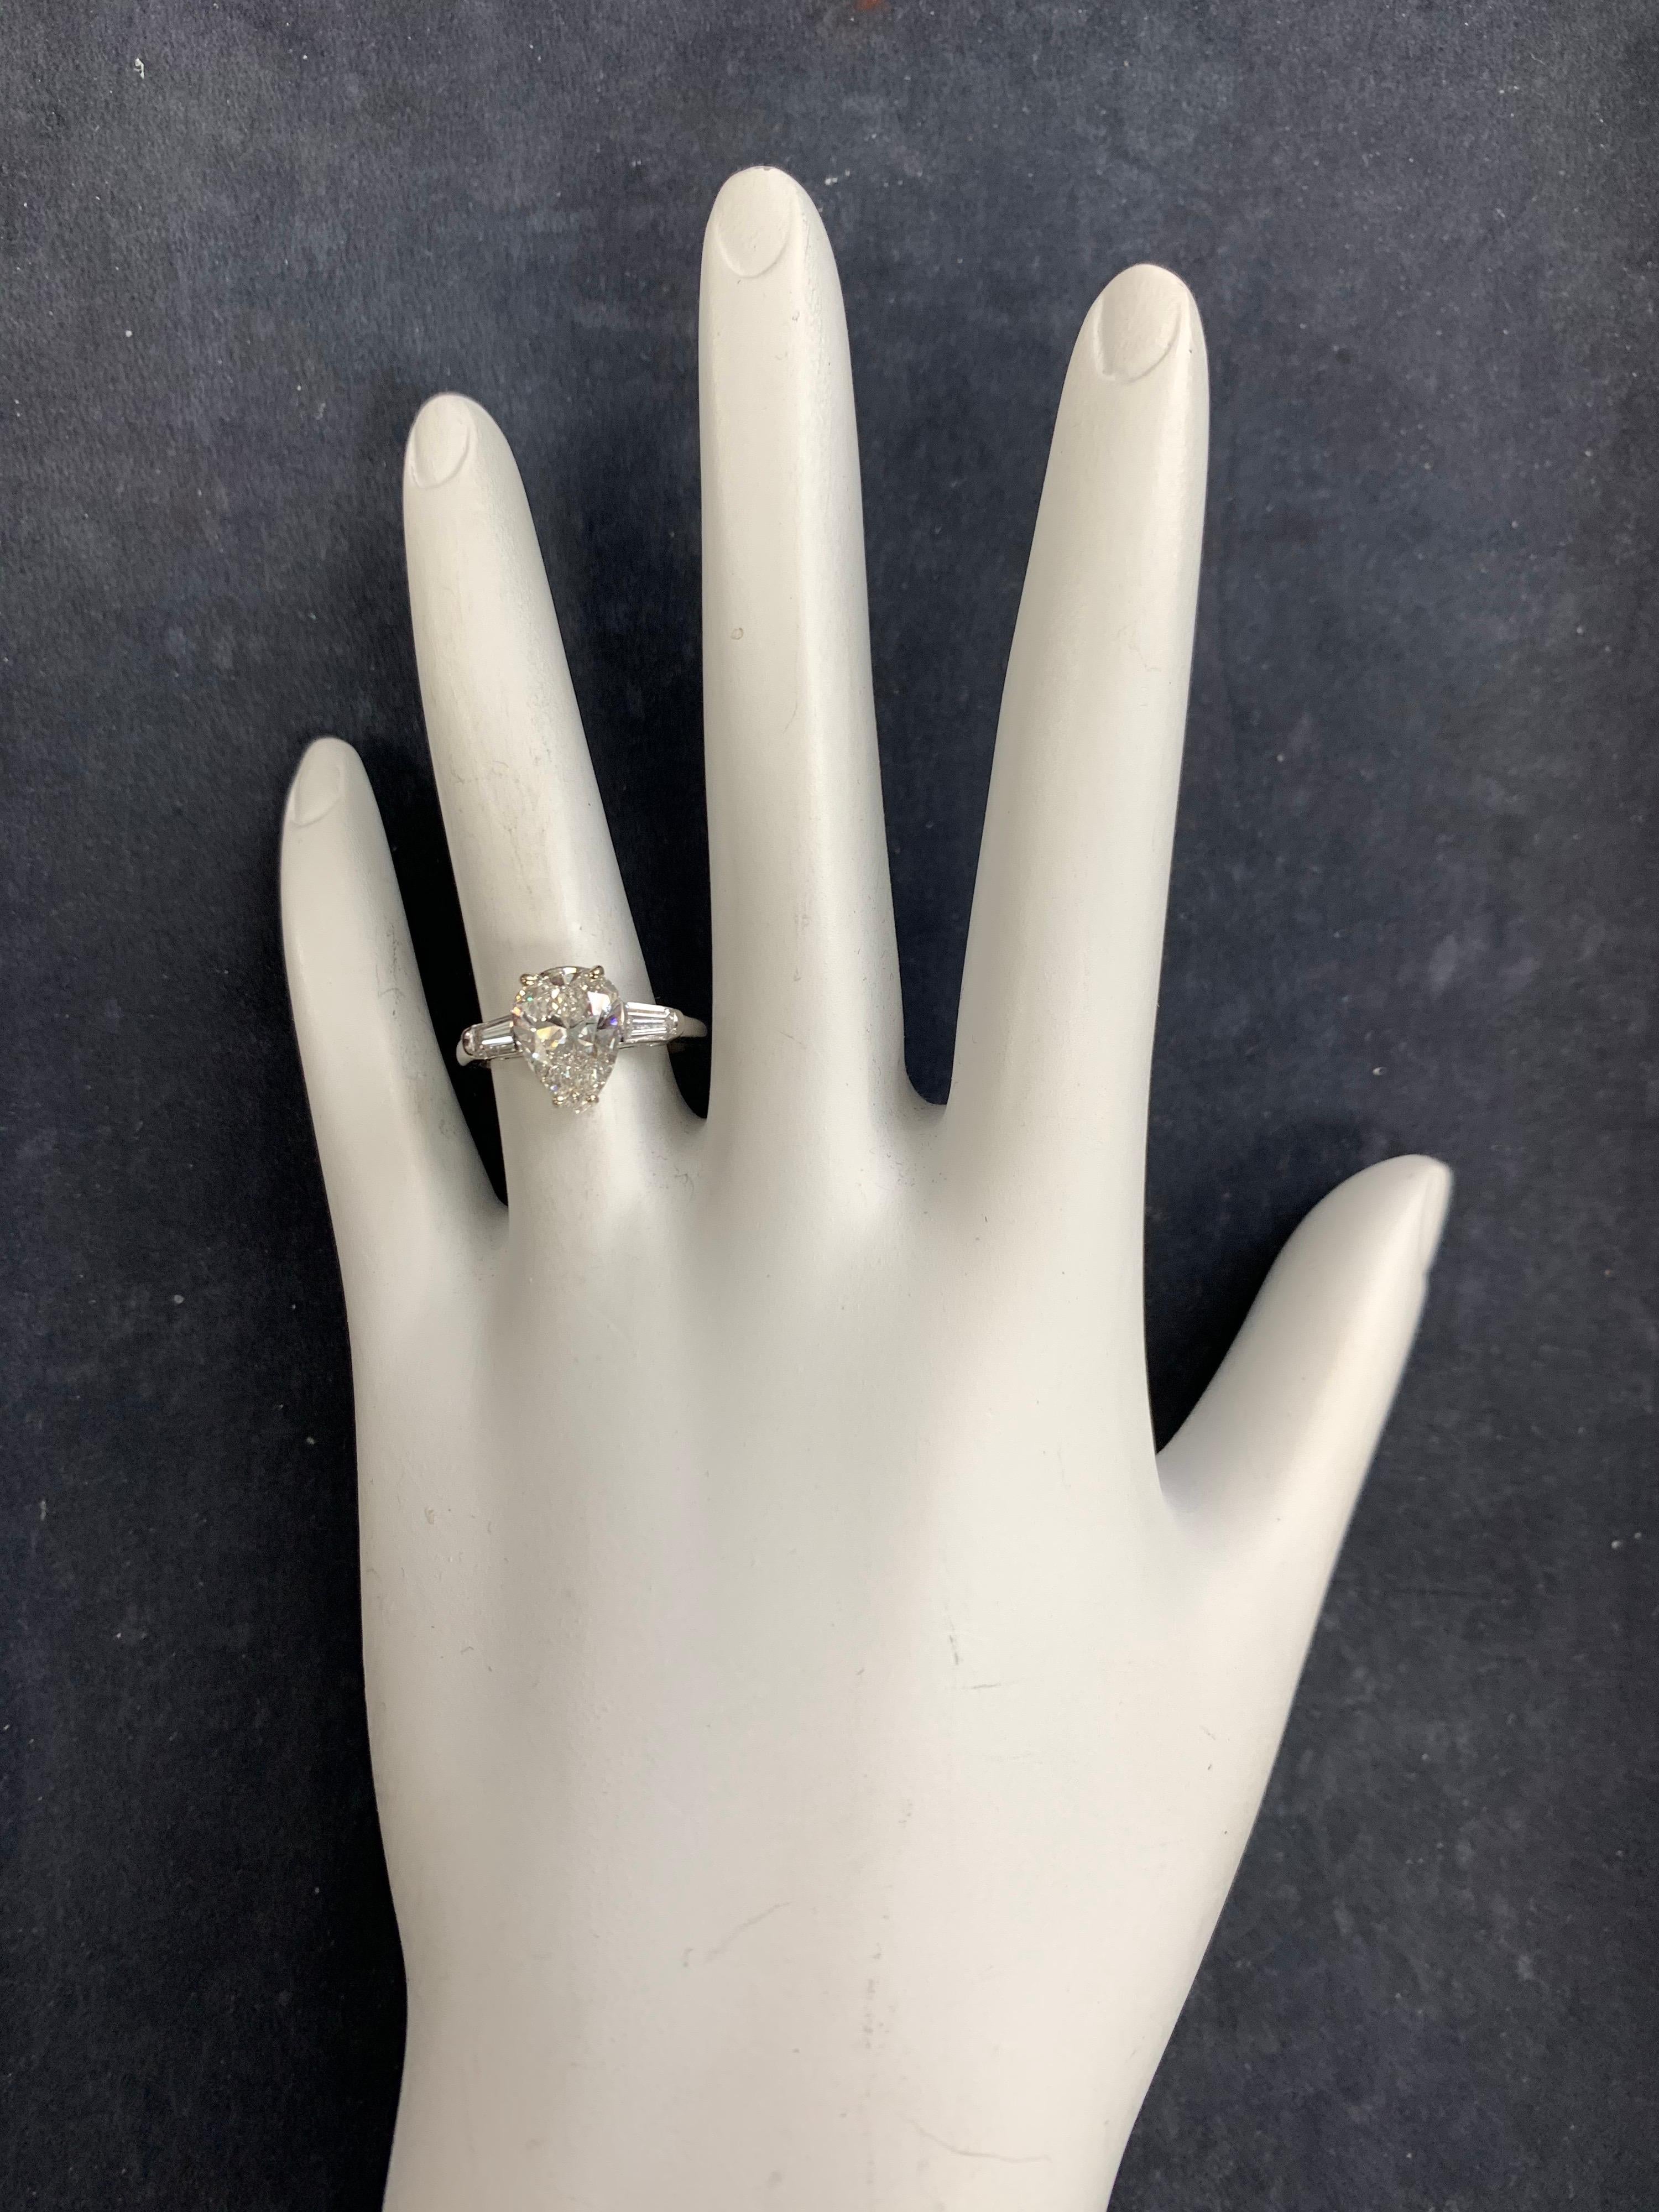 A Stunning 18k White Gold Pear Brilliant Engagement Ring set with a 2.09 carat EGL Certified Natural Pear Diamond G in color and SI1 in clarity. 

Flanking the cnterstone are two colorless tapered baguette natural diamonds measuring approximately